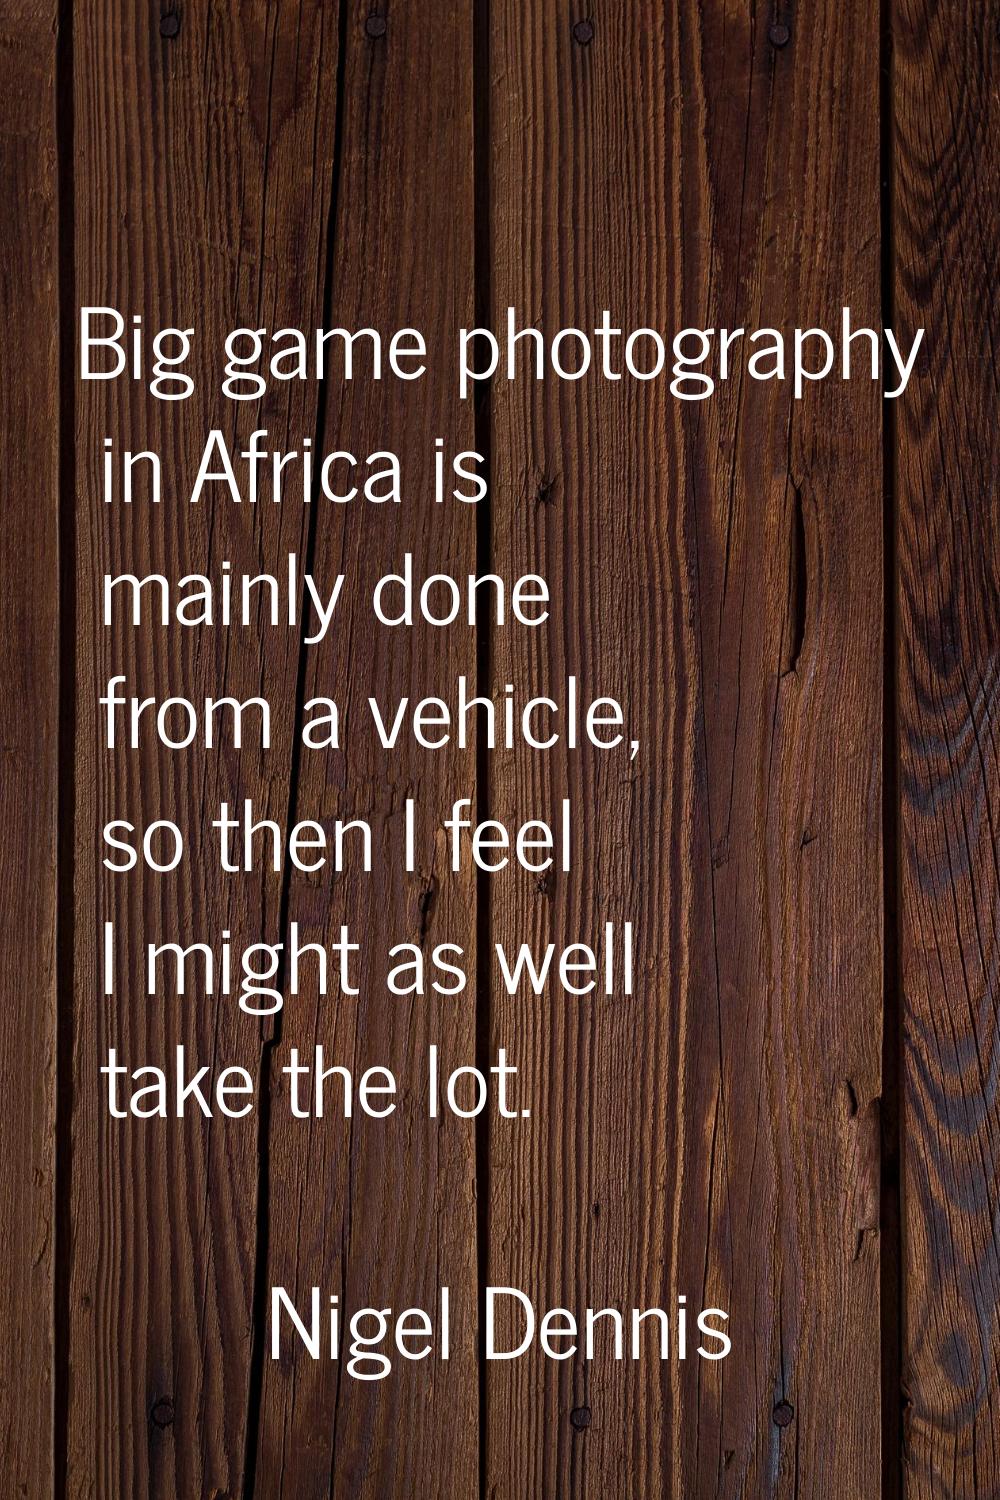 Big game photography in Africa is mainly done from a vehicle, so then I feel I might as well take t